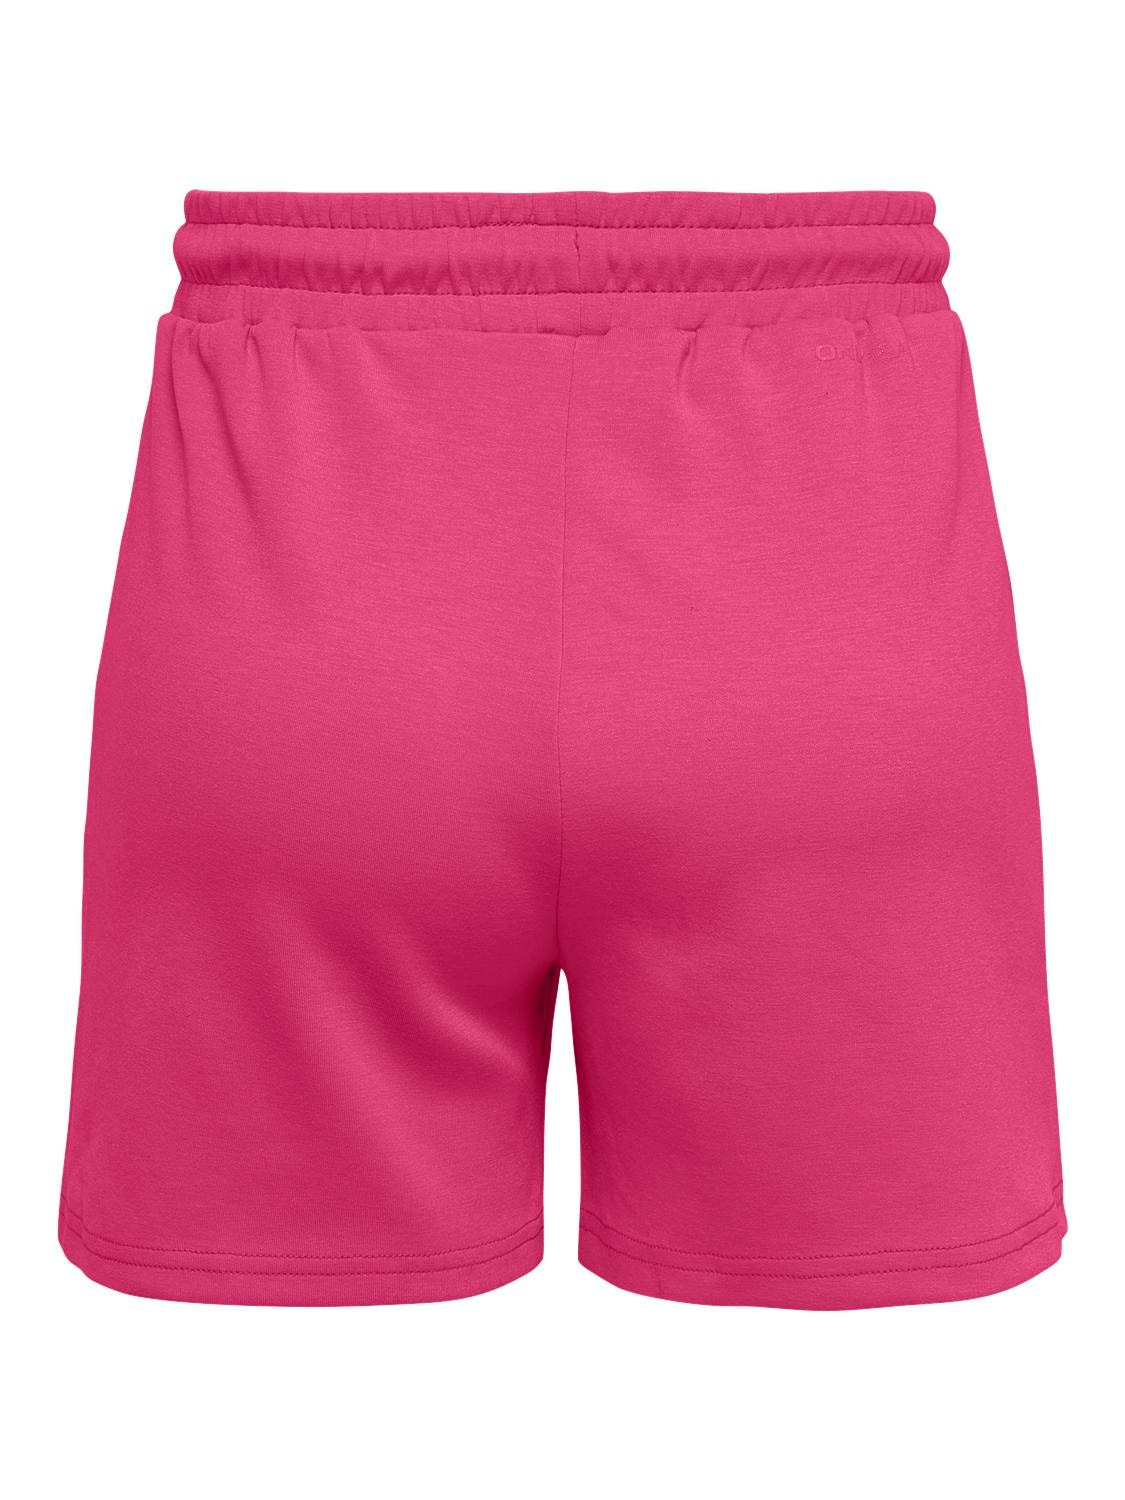 ONLY Loose Fit High waist Shorts -Raspberry Sorbet - 15245851